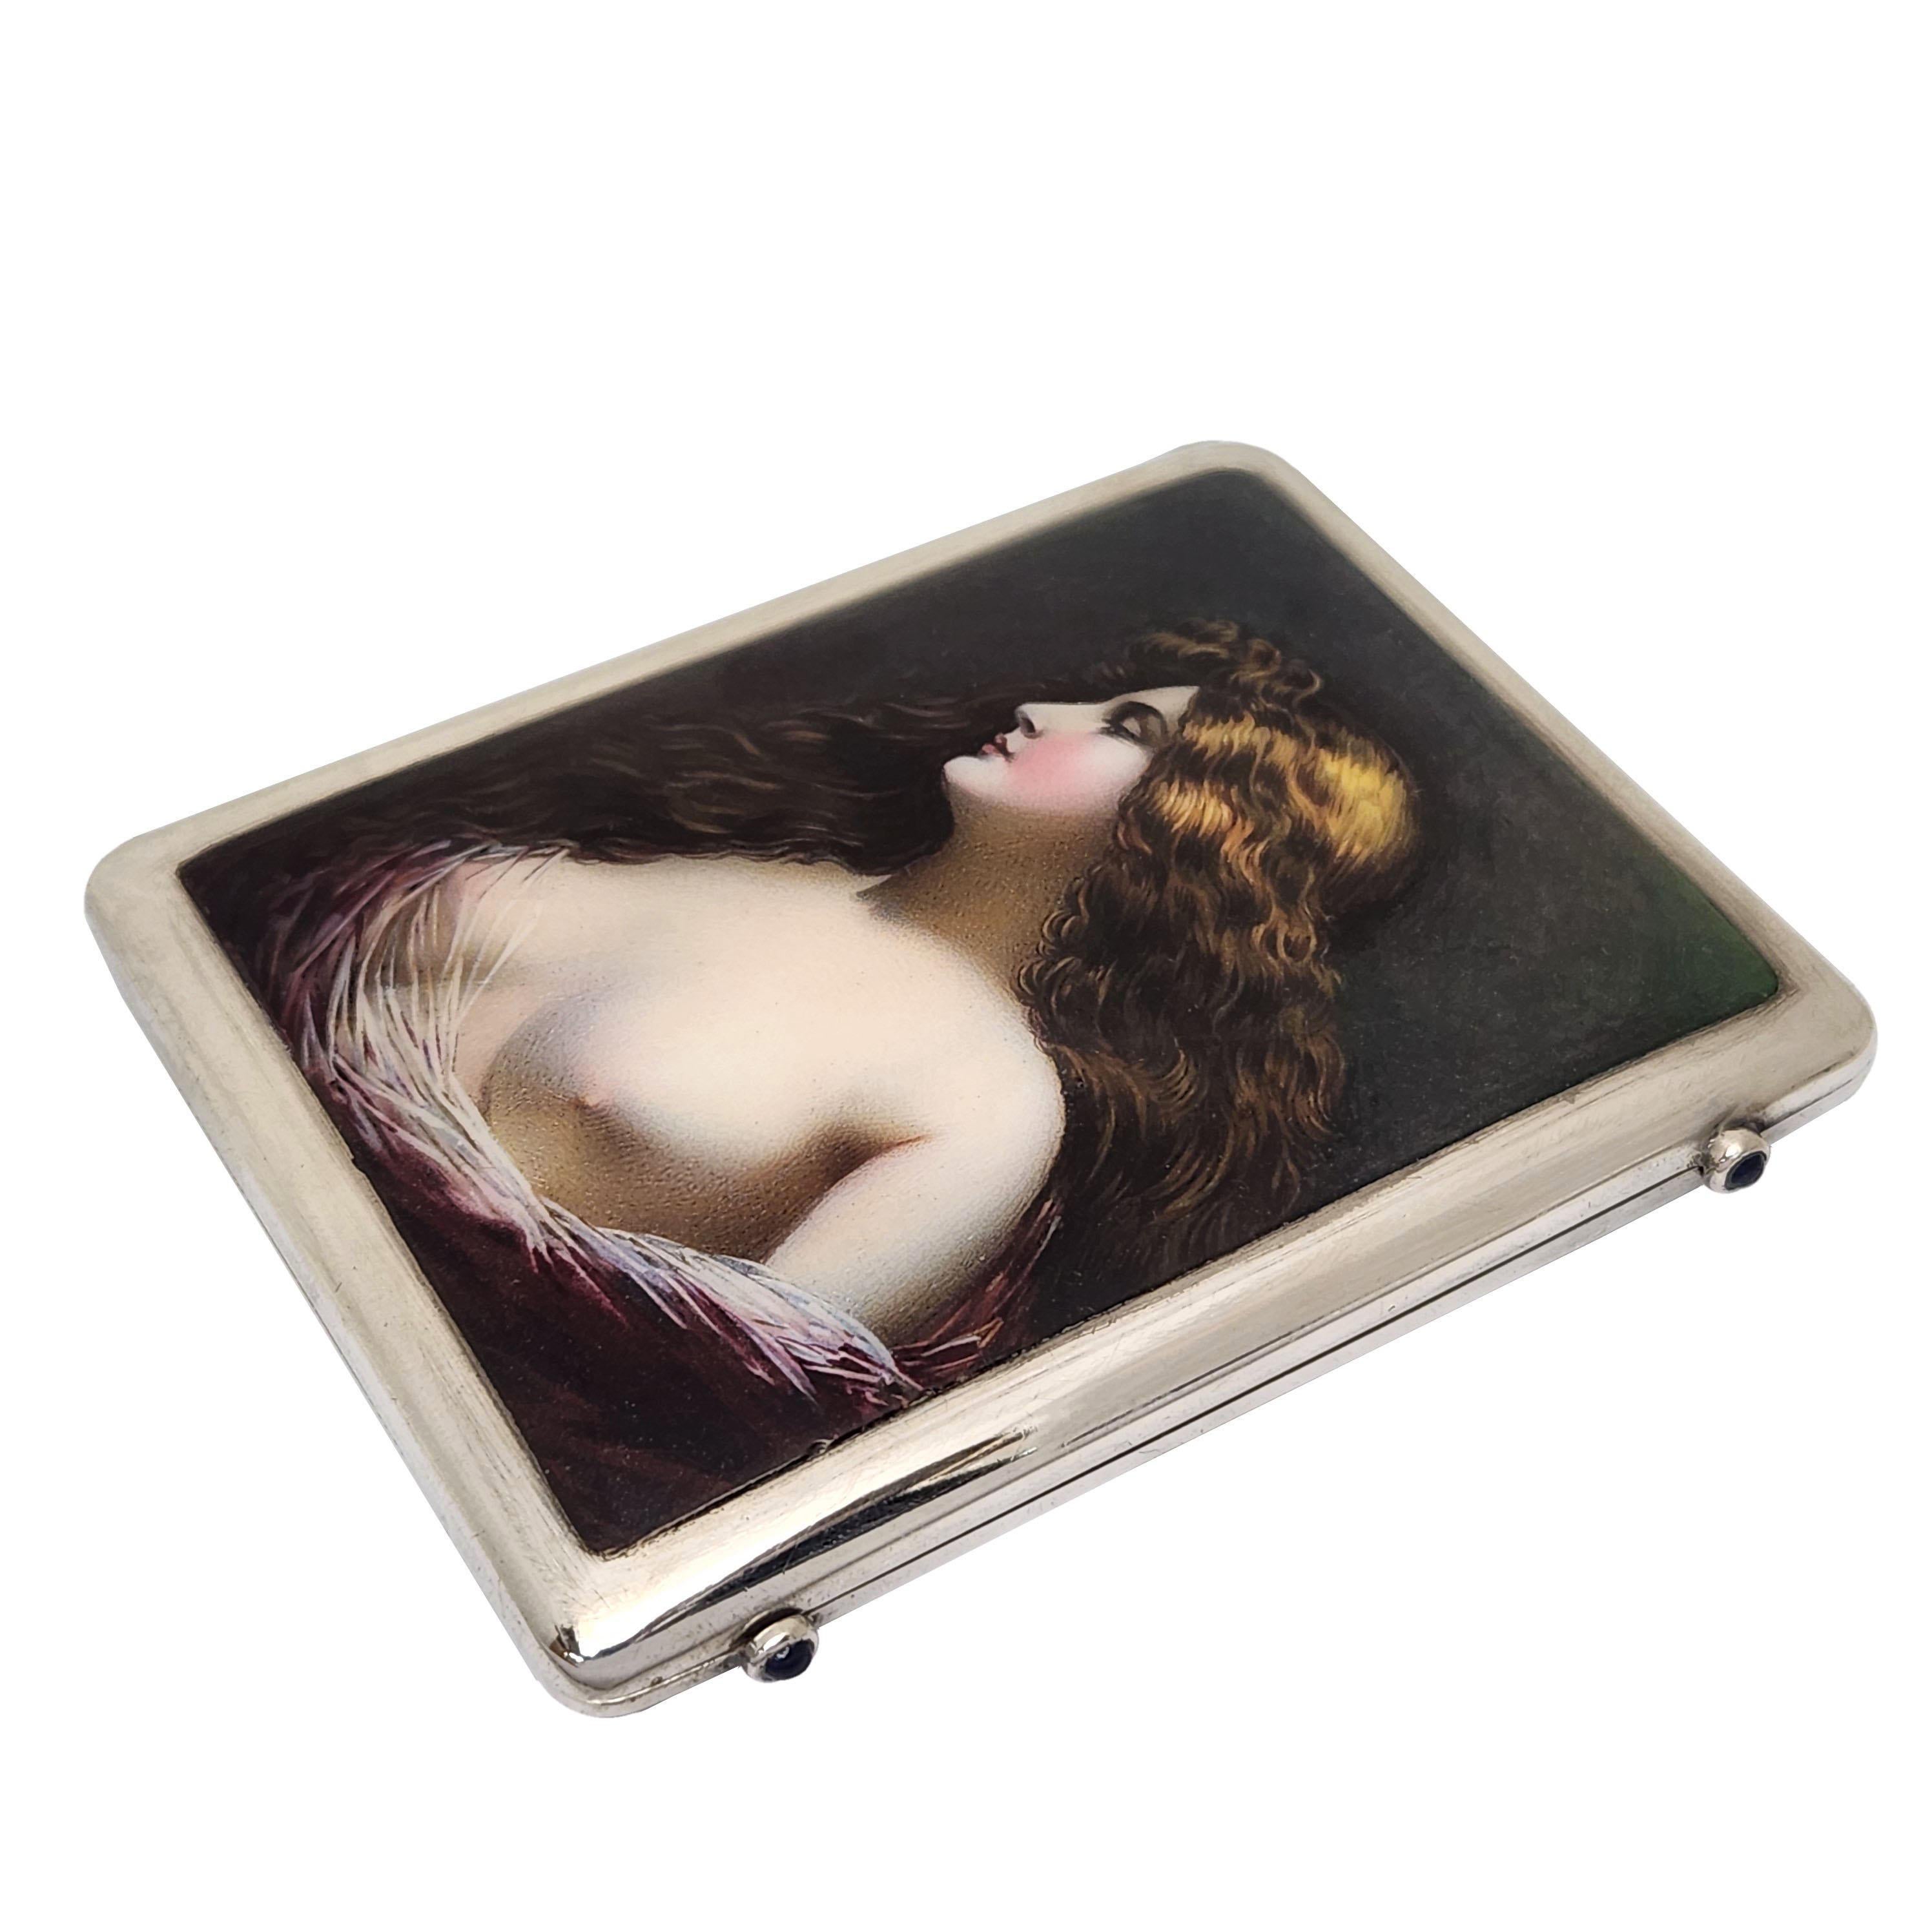 A beautiful Silver Cigarette Case decorated with a beautiful Enamel Image on the front of the case. The Image shows a woman with rich golden brow hair covered in part with a diaphanous wrap and with her breasts exposed. The Case has a pair of